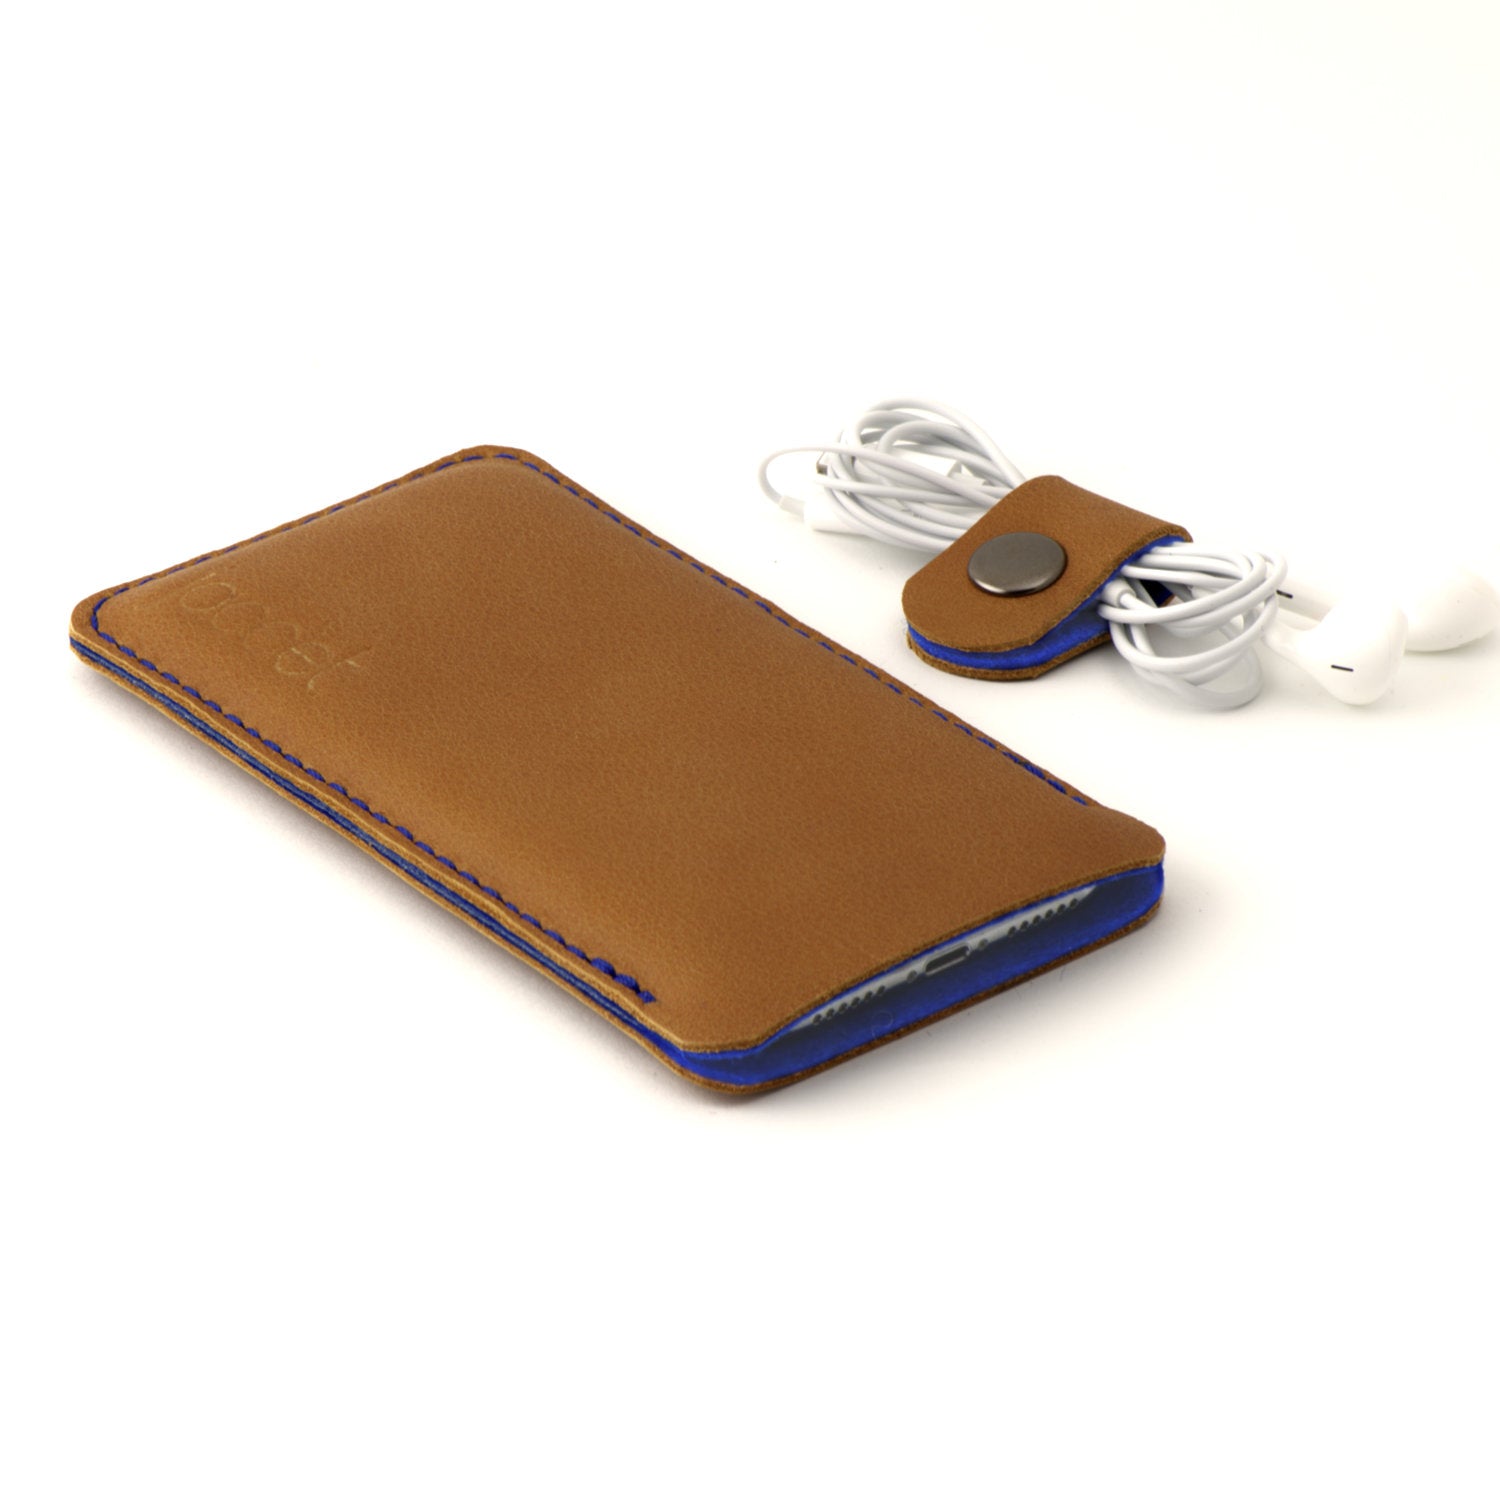 JACCET leather iPhone sleeve - Cognac color leather with blue wool felt - 100% Handmade